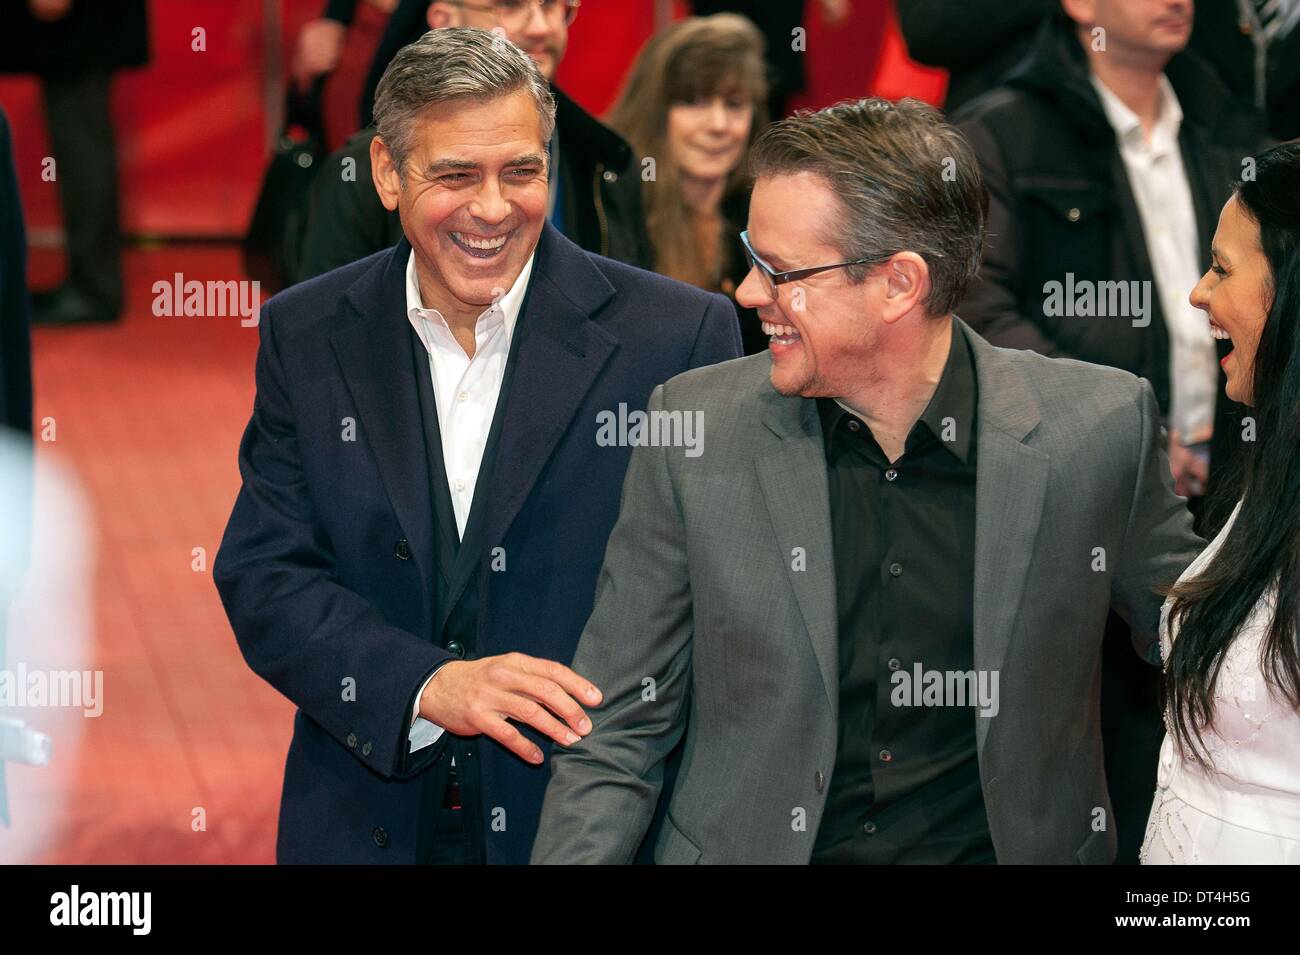 Berlin, Germany. 8th Feb, 2014. George Clooney (L) and Matt Damon (R) during the Red Carpet of ''The Monuments Men'' at the Berlinale, in Berlin, Germany, on February 8, 2014. Credit:  Goncalo Silva/NurPhoto/ZUMAPRESS.com/Alamy Live News Stock Photo